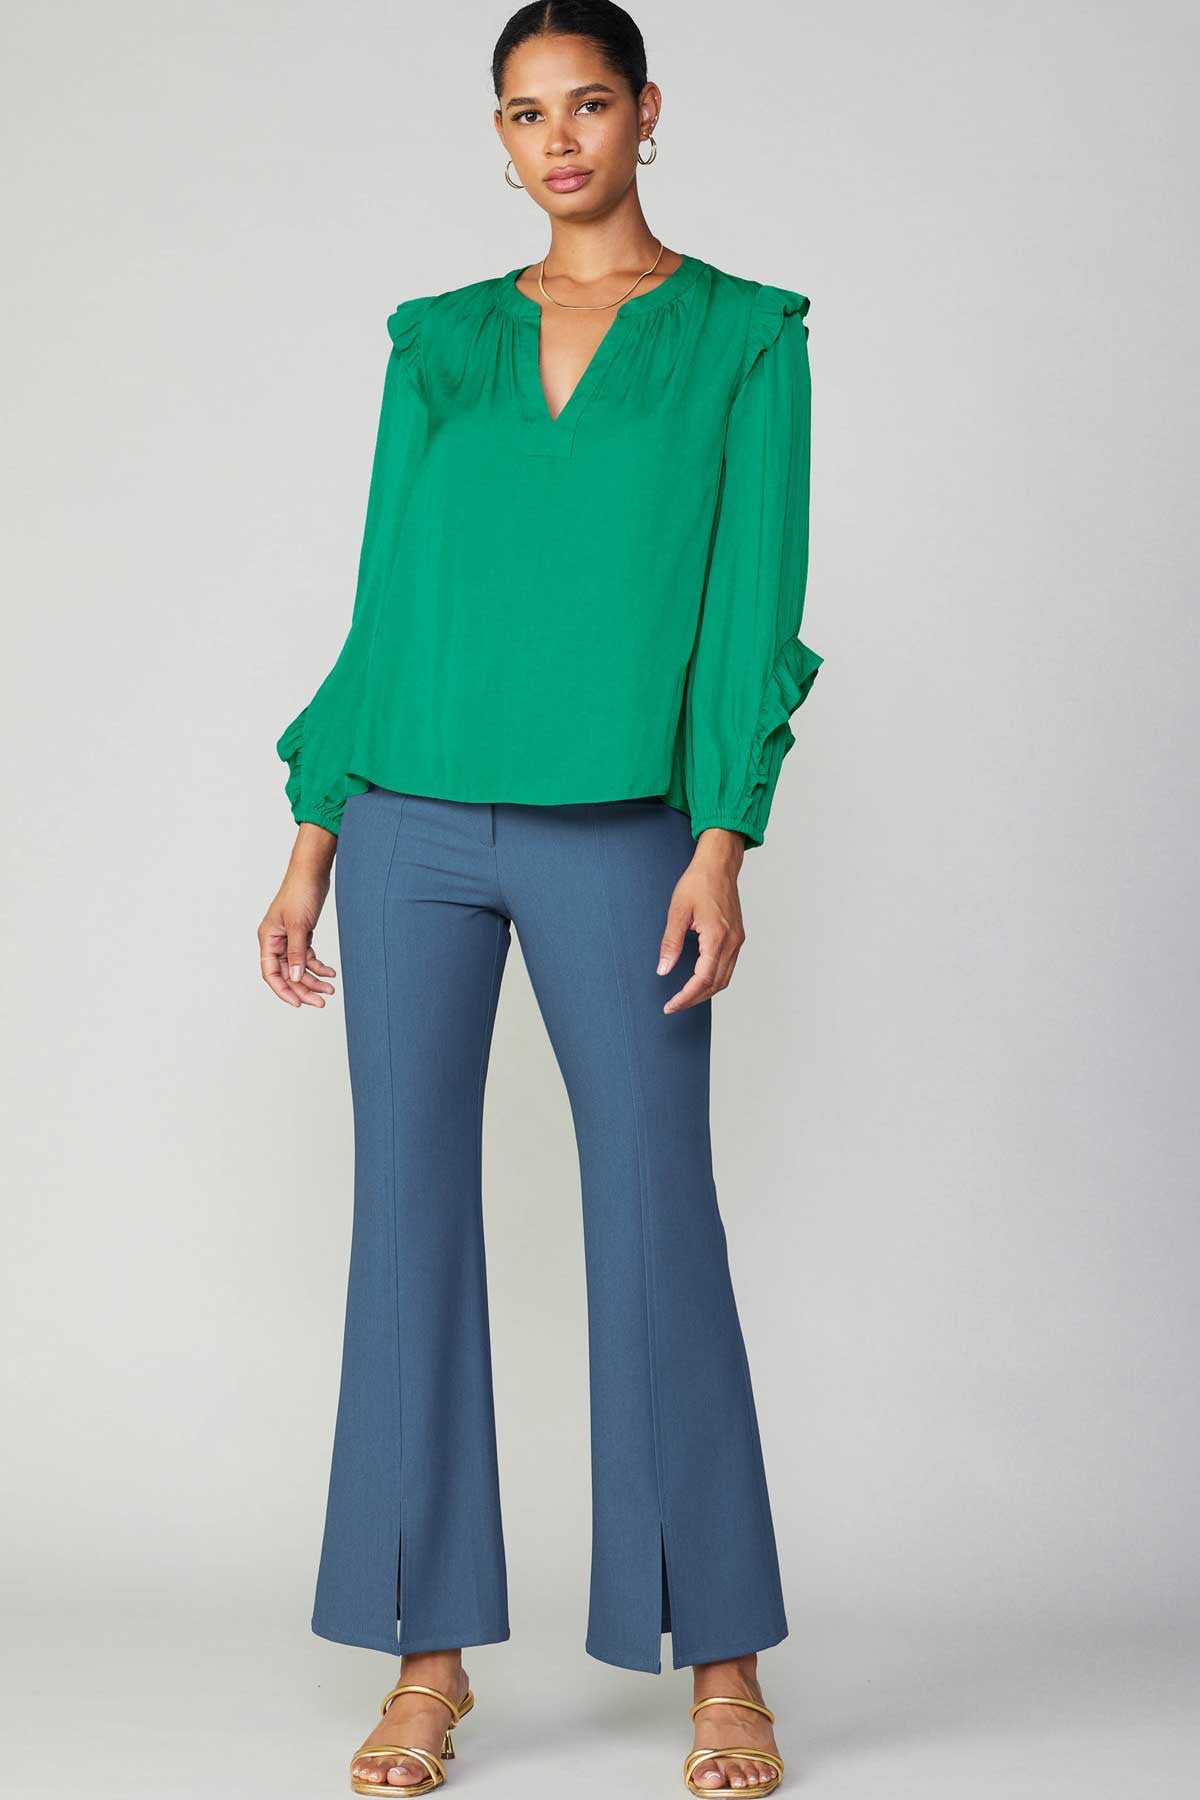 Long Sleeve Collared Split Neck Blouse in green by Current Air